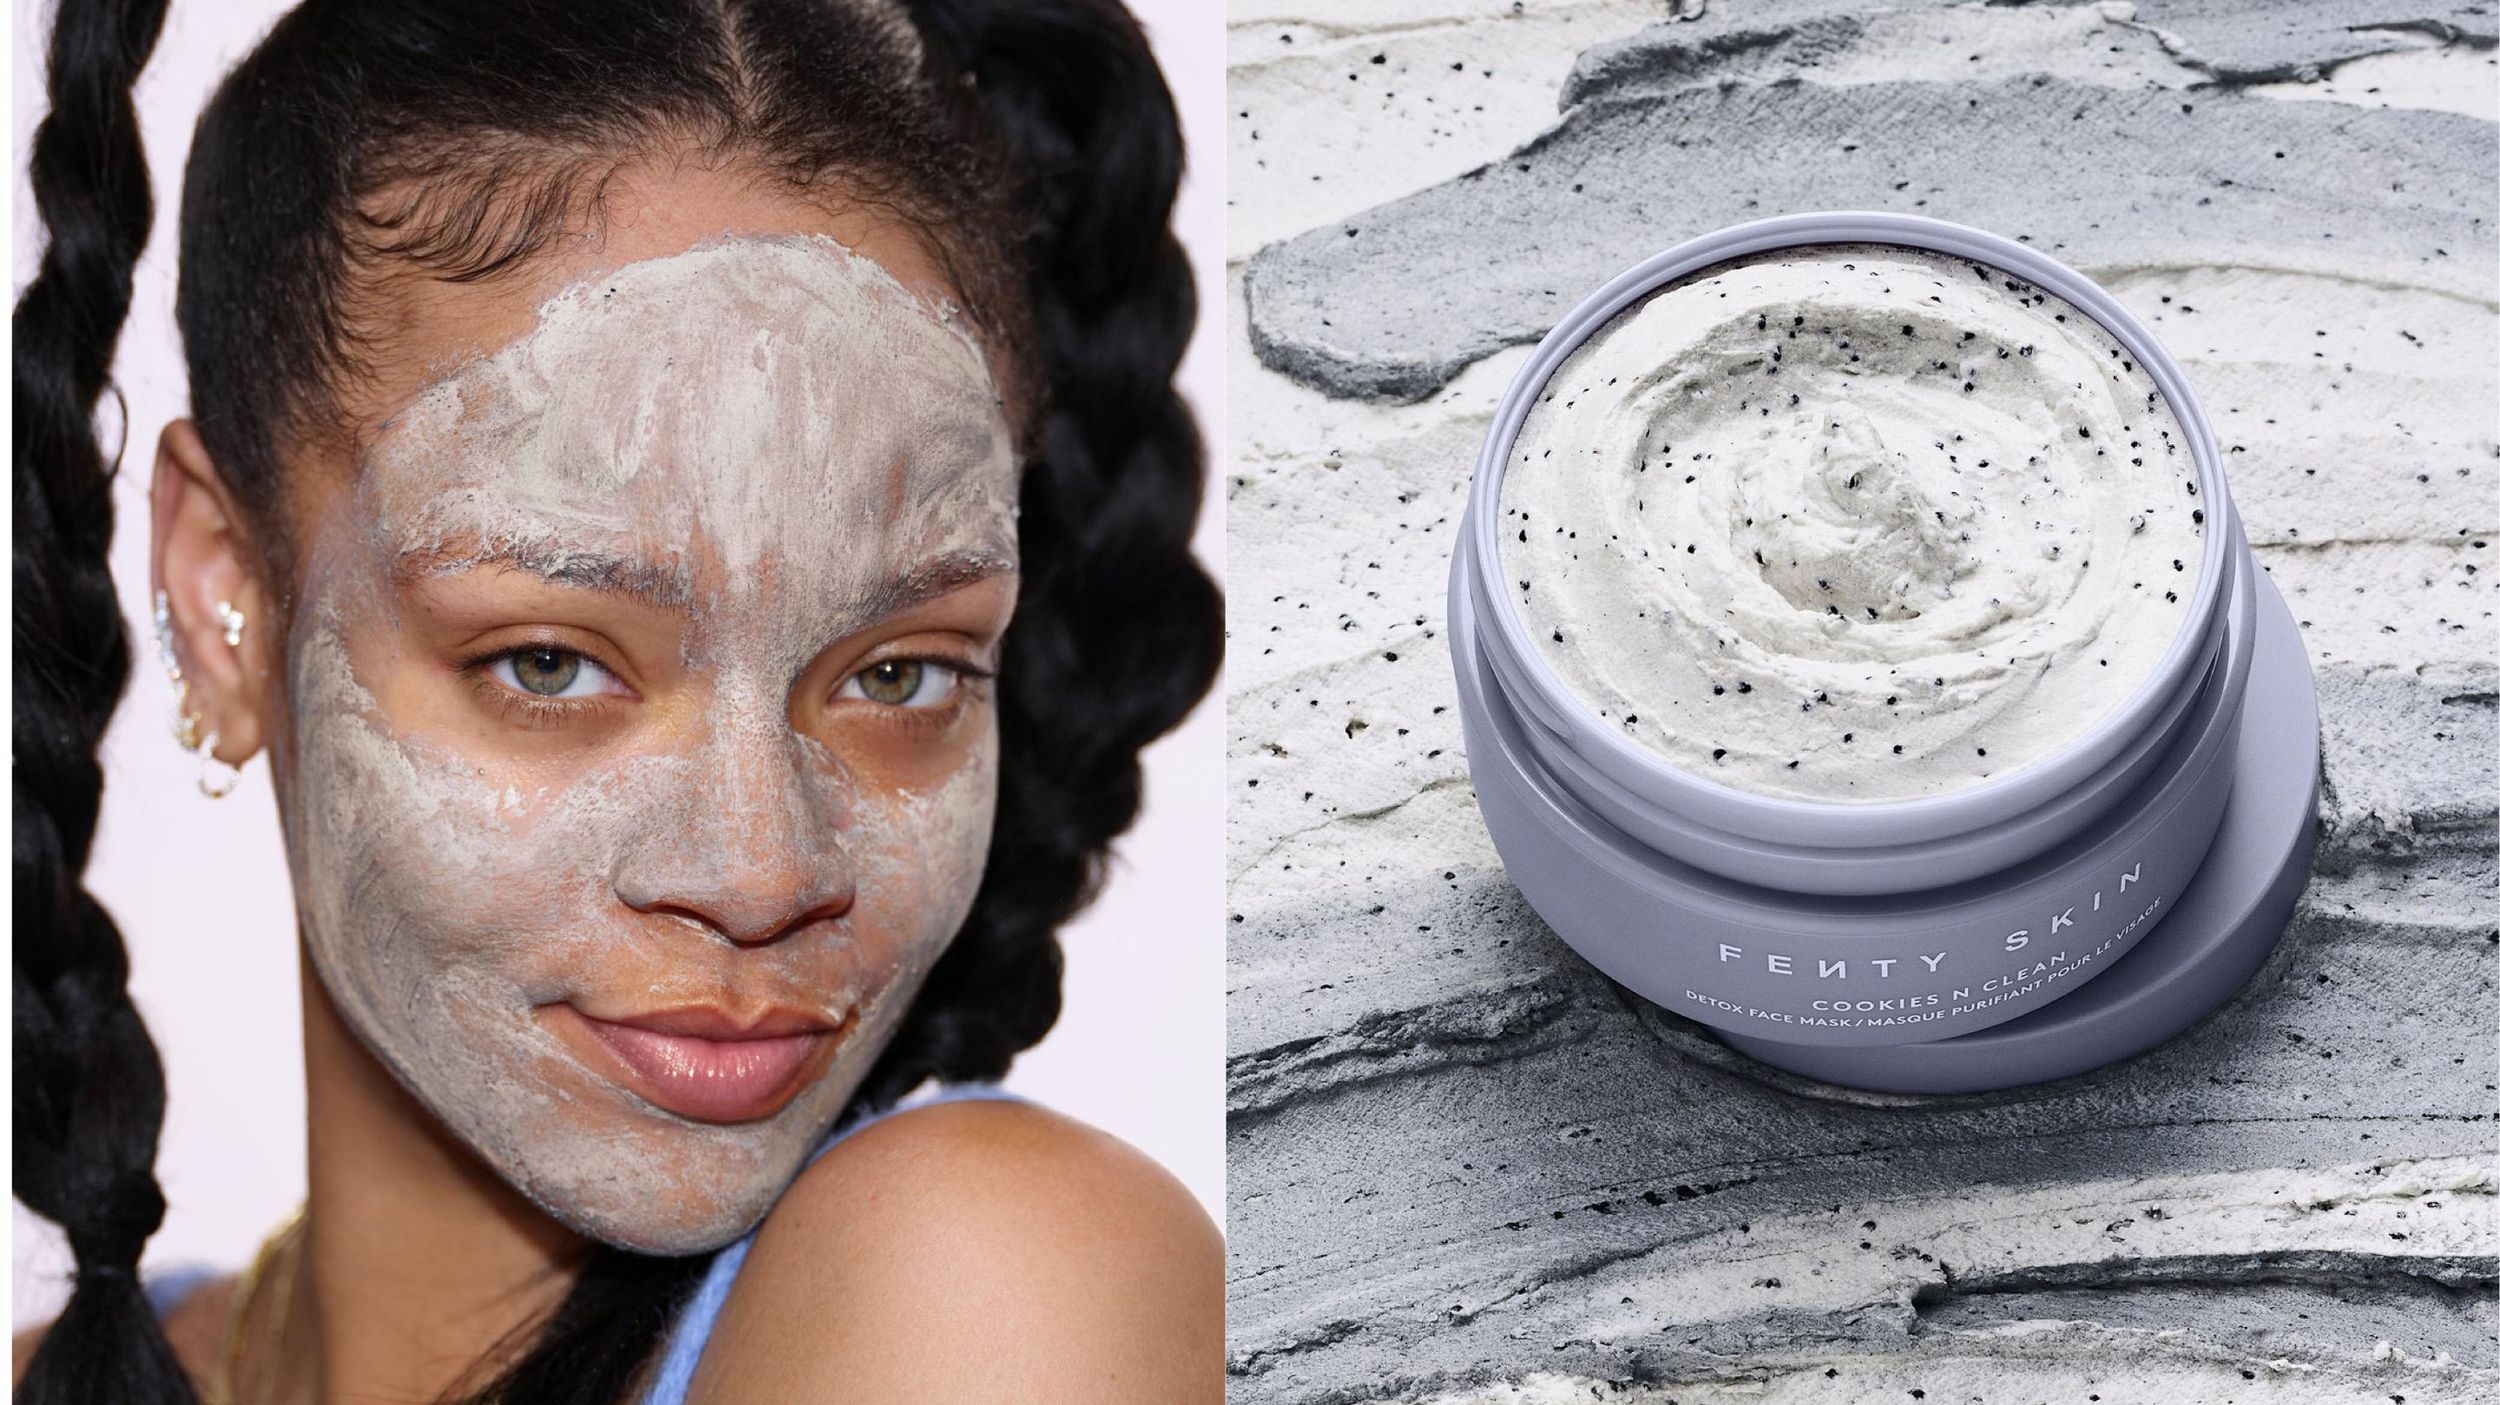 A Fenty Skin Face Mask, Plus 9 Other Standout April Beauty Launches to Have on Your Radar